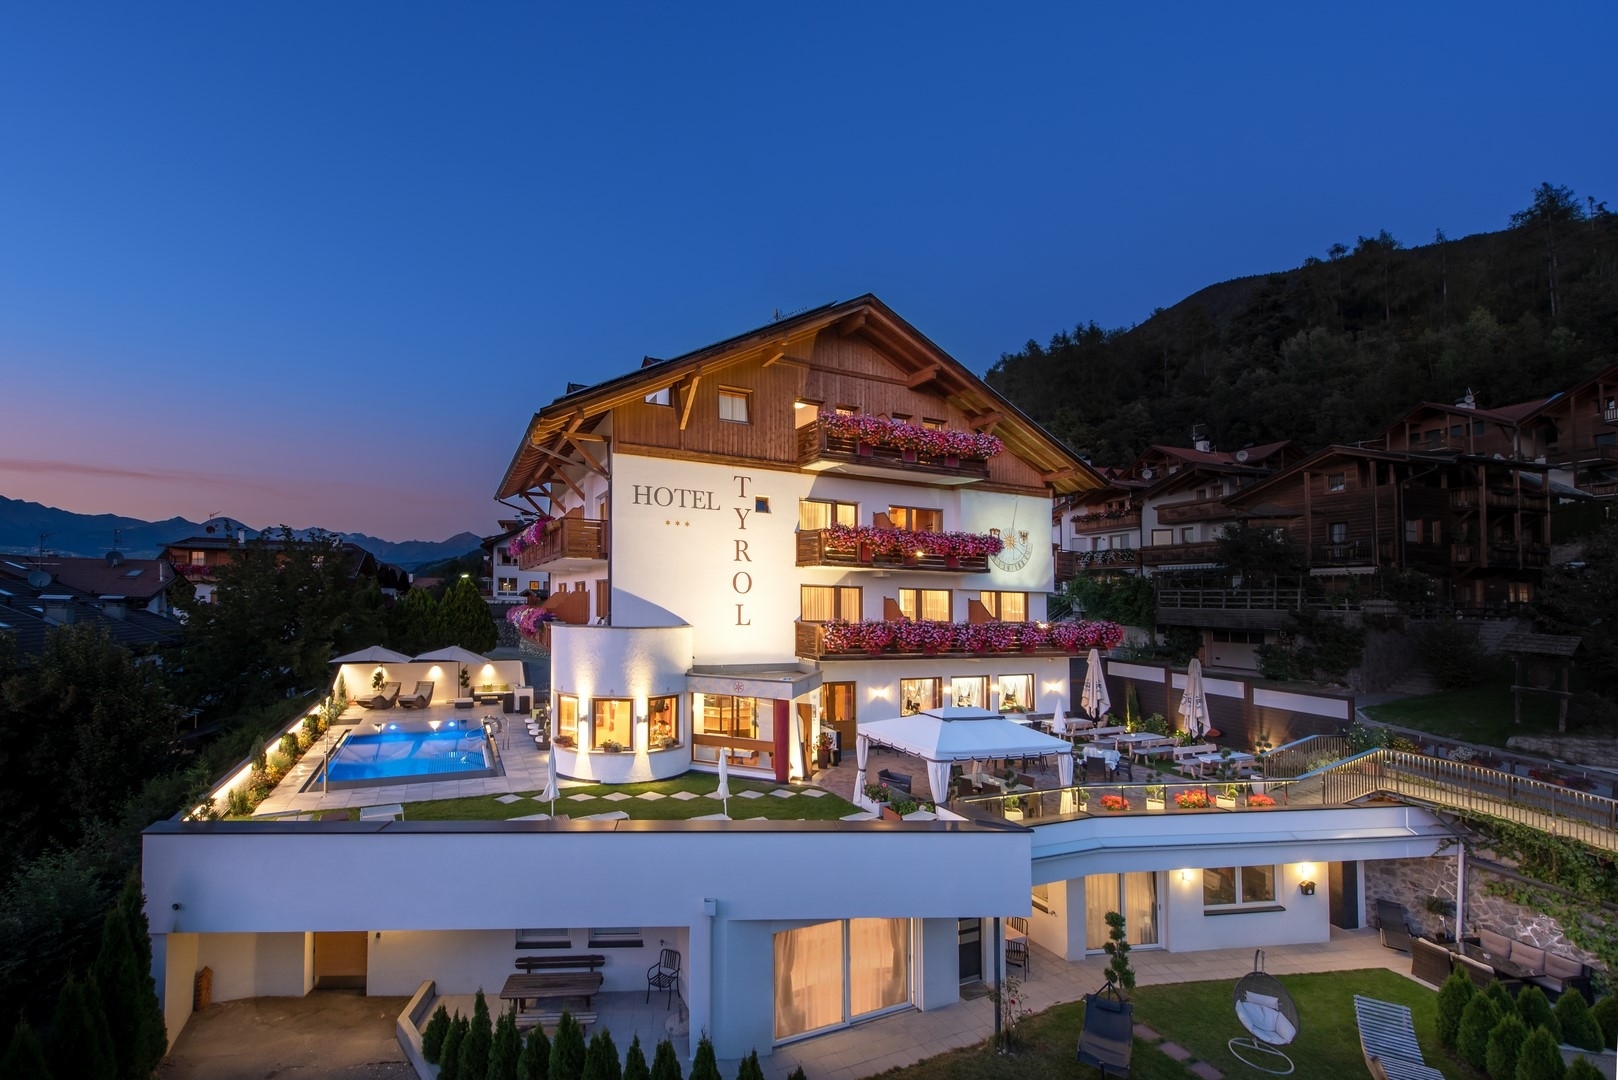 Hotel Tyrol - S. Andrea in Valle Isarco